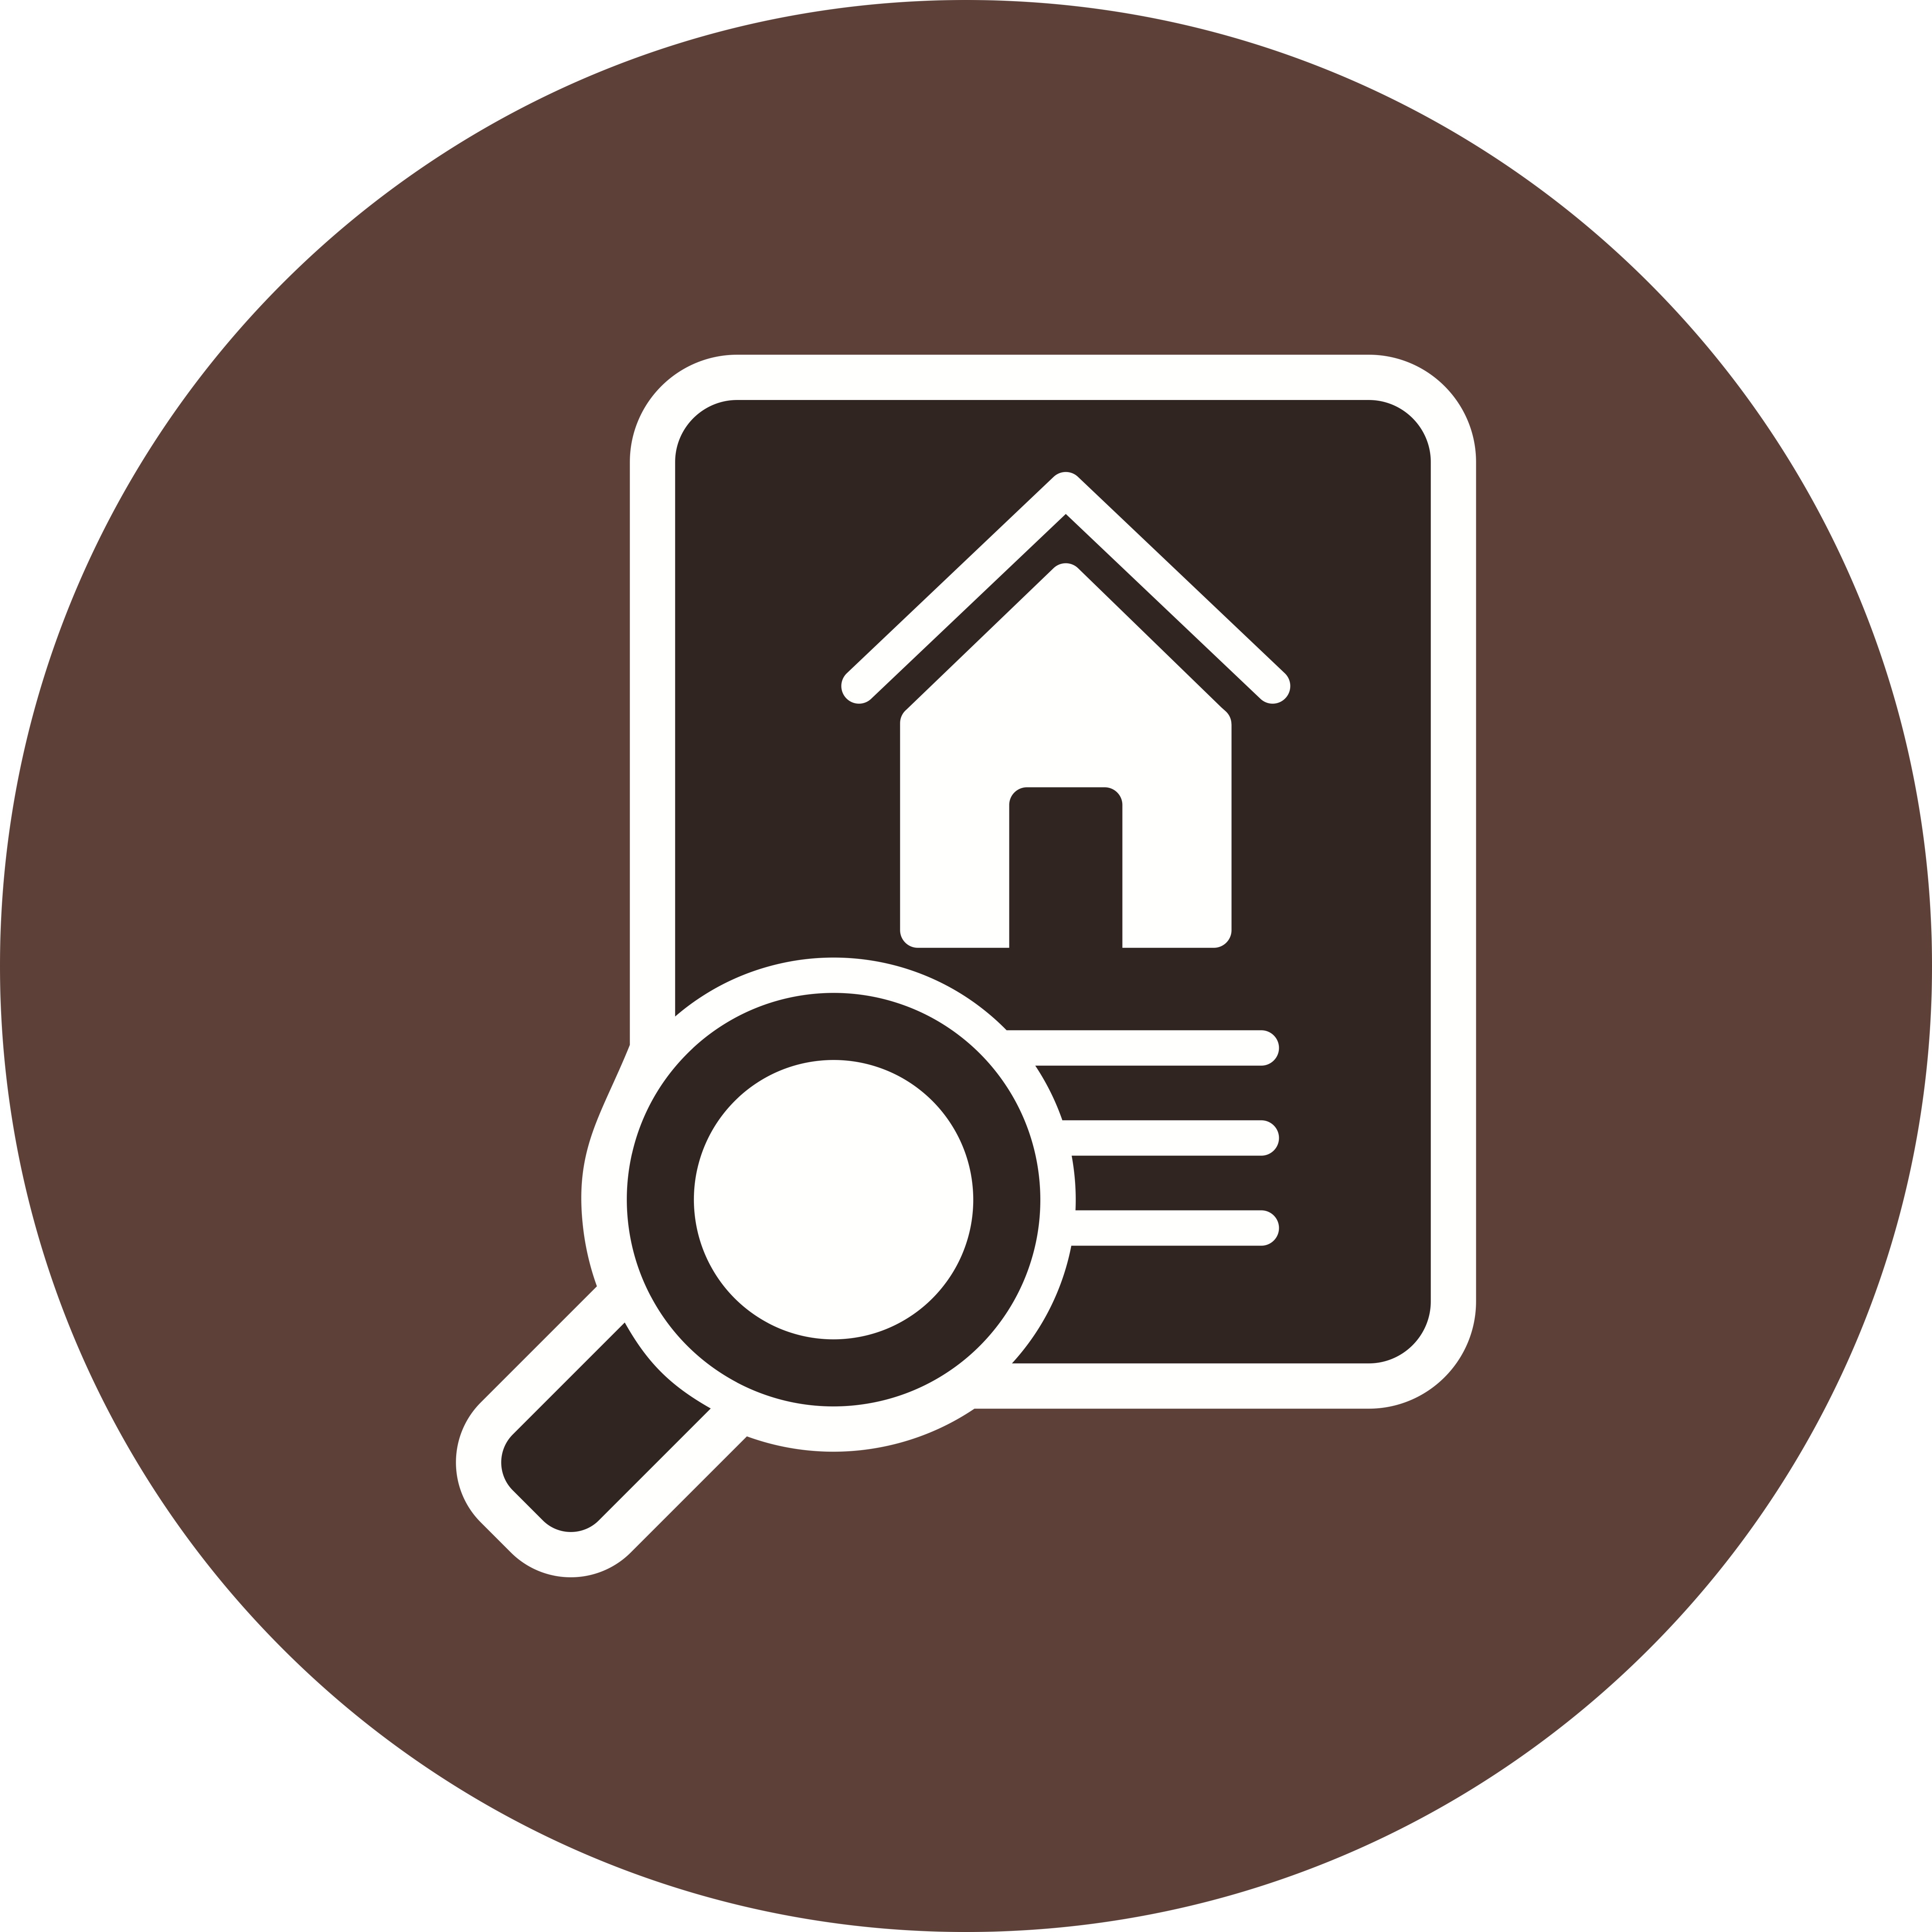 Download Property Search Vector Icon 349768 - Download Free Vectors, Clipart Graphics & Vector Art